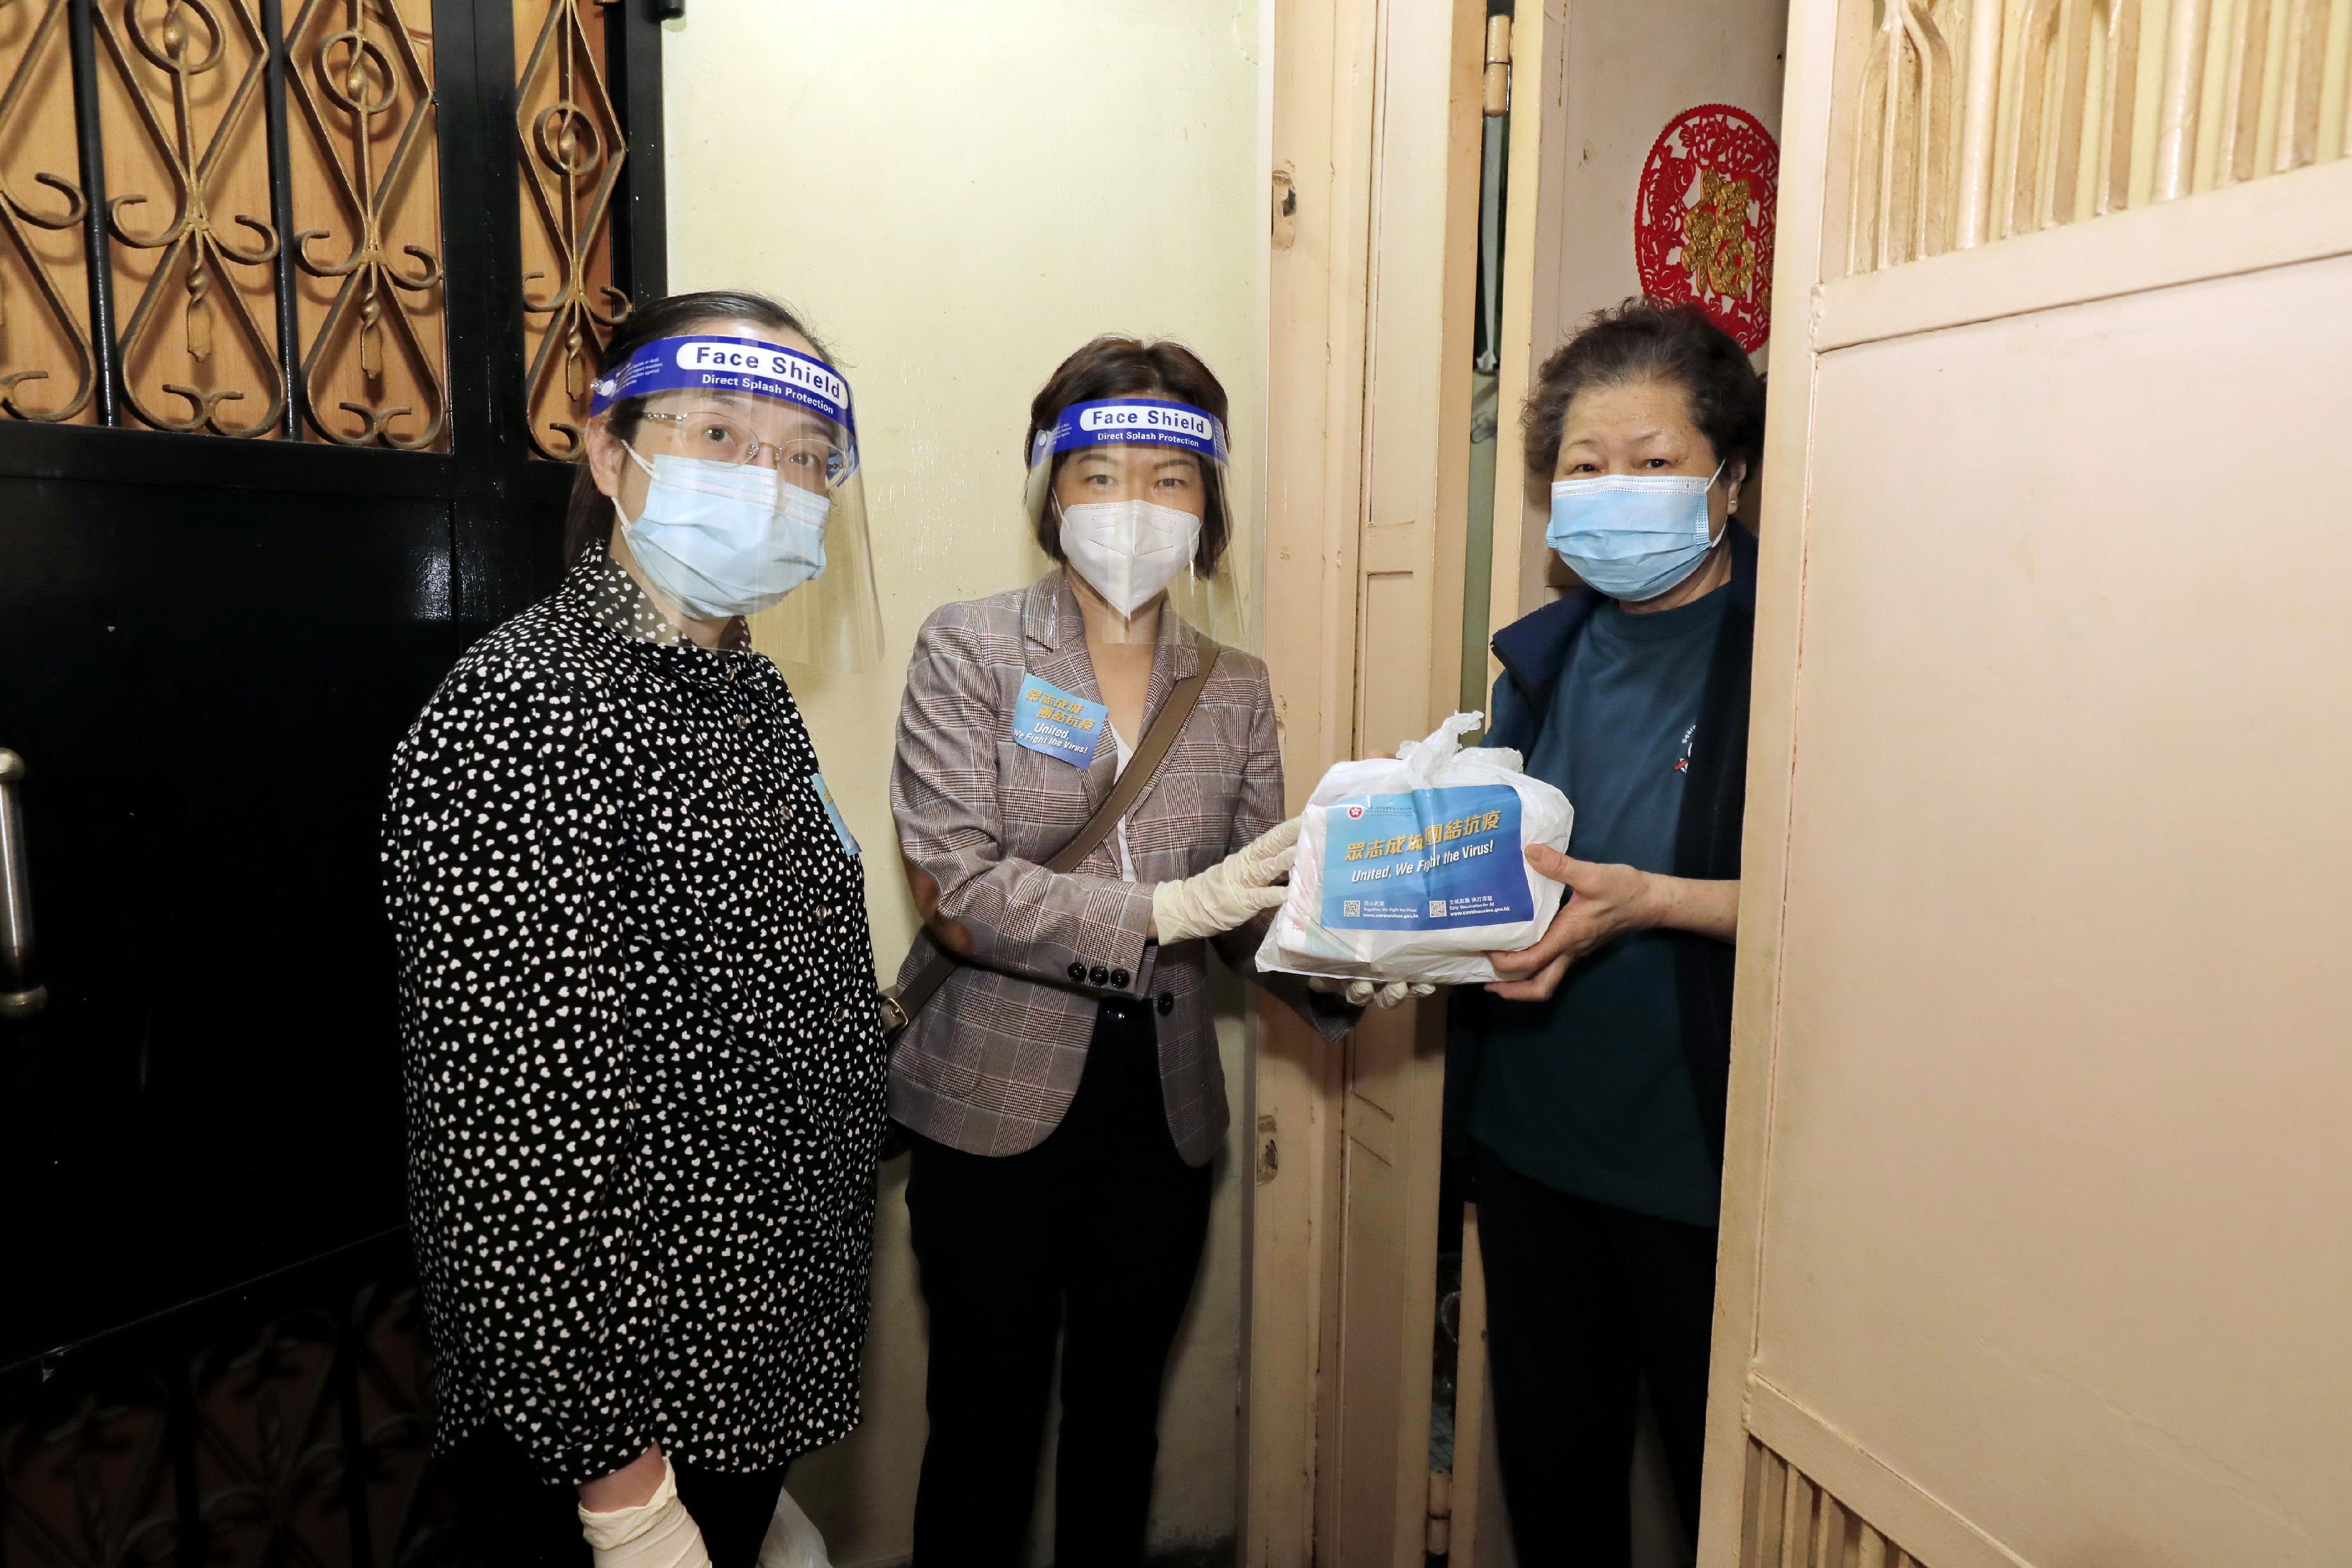 The new Director of Home Affairs, Mrs Alice Cheung, together with volunteer groups today (April 6) distributed anti-epidemic service bags to grassroots families in an old building in Yau Ma Tei. Photo shows Mrs Cheung (centre) and the Deputy Director of Home Affairs, Miss Vega Wong (left), distributing an anti-epidemic service bag door-to-door to a resident living in the old building.